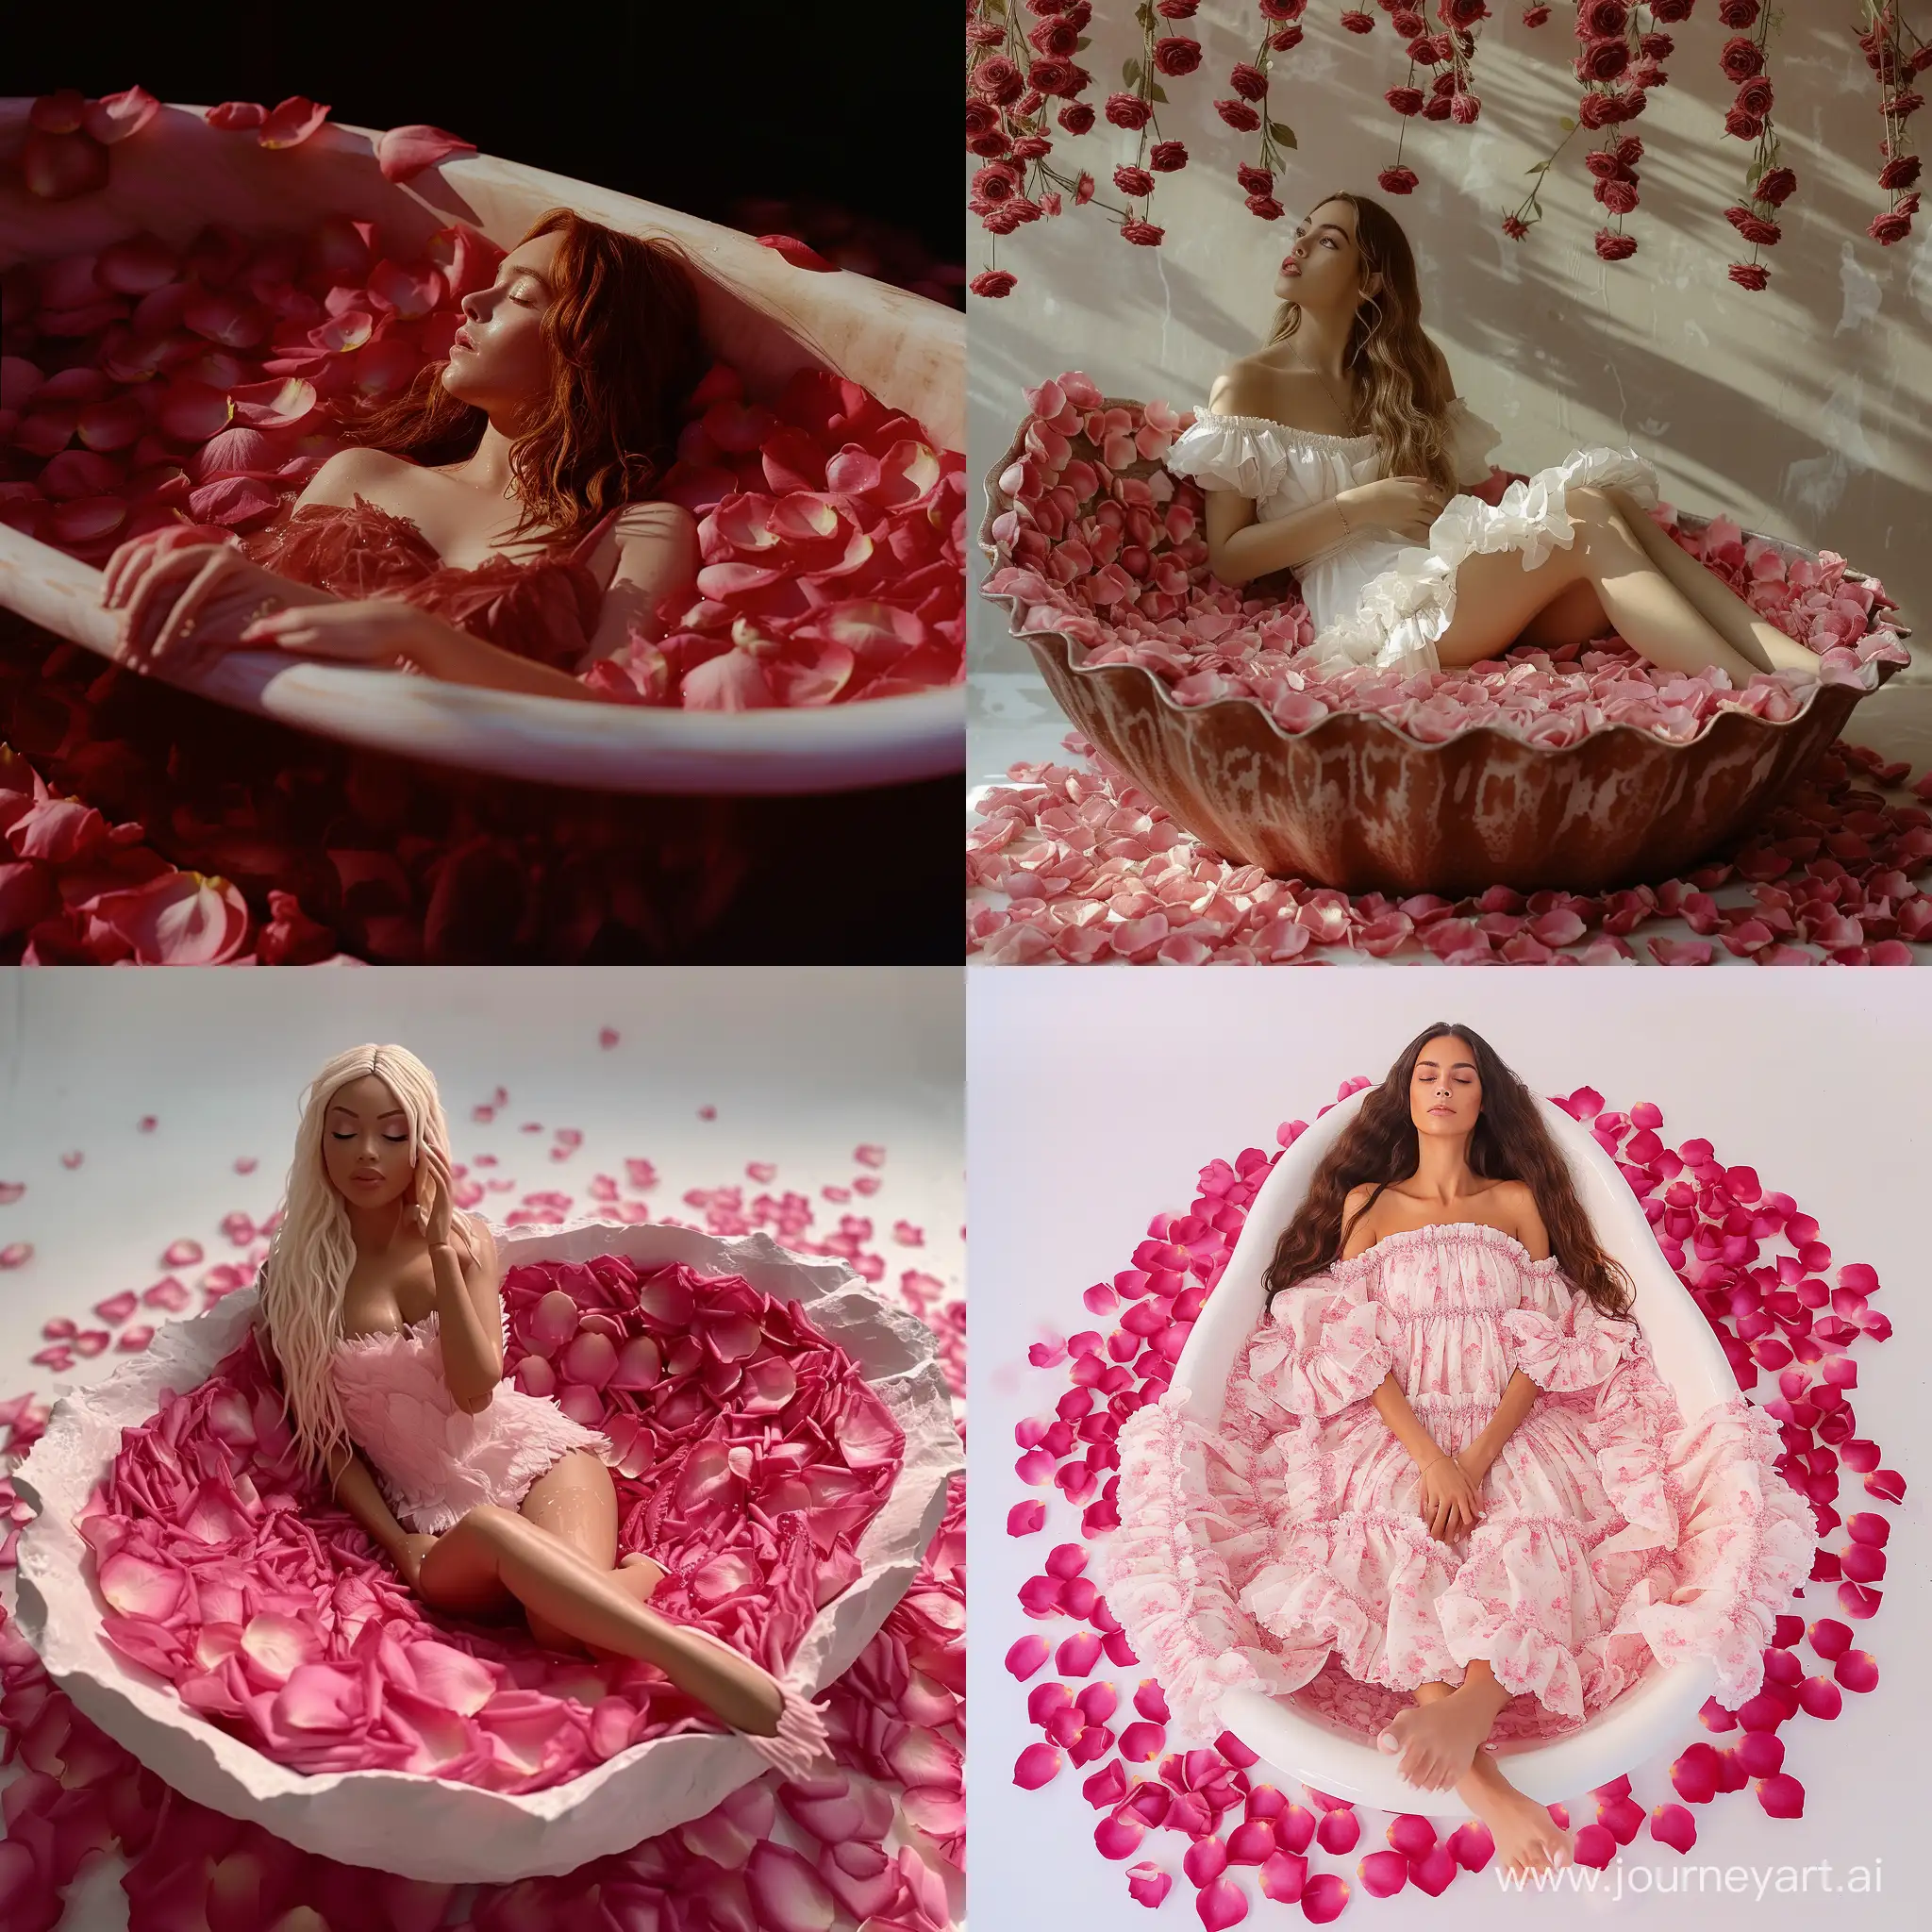 model that doesn't exist in real life in a rose petal bath tub